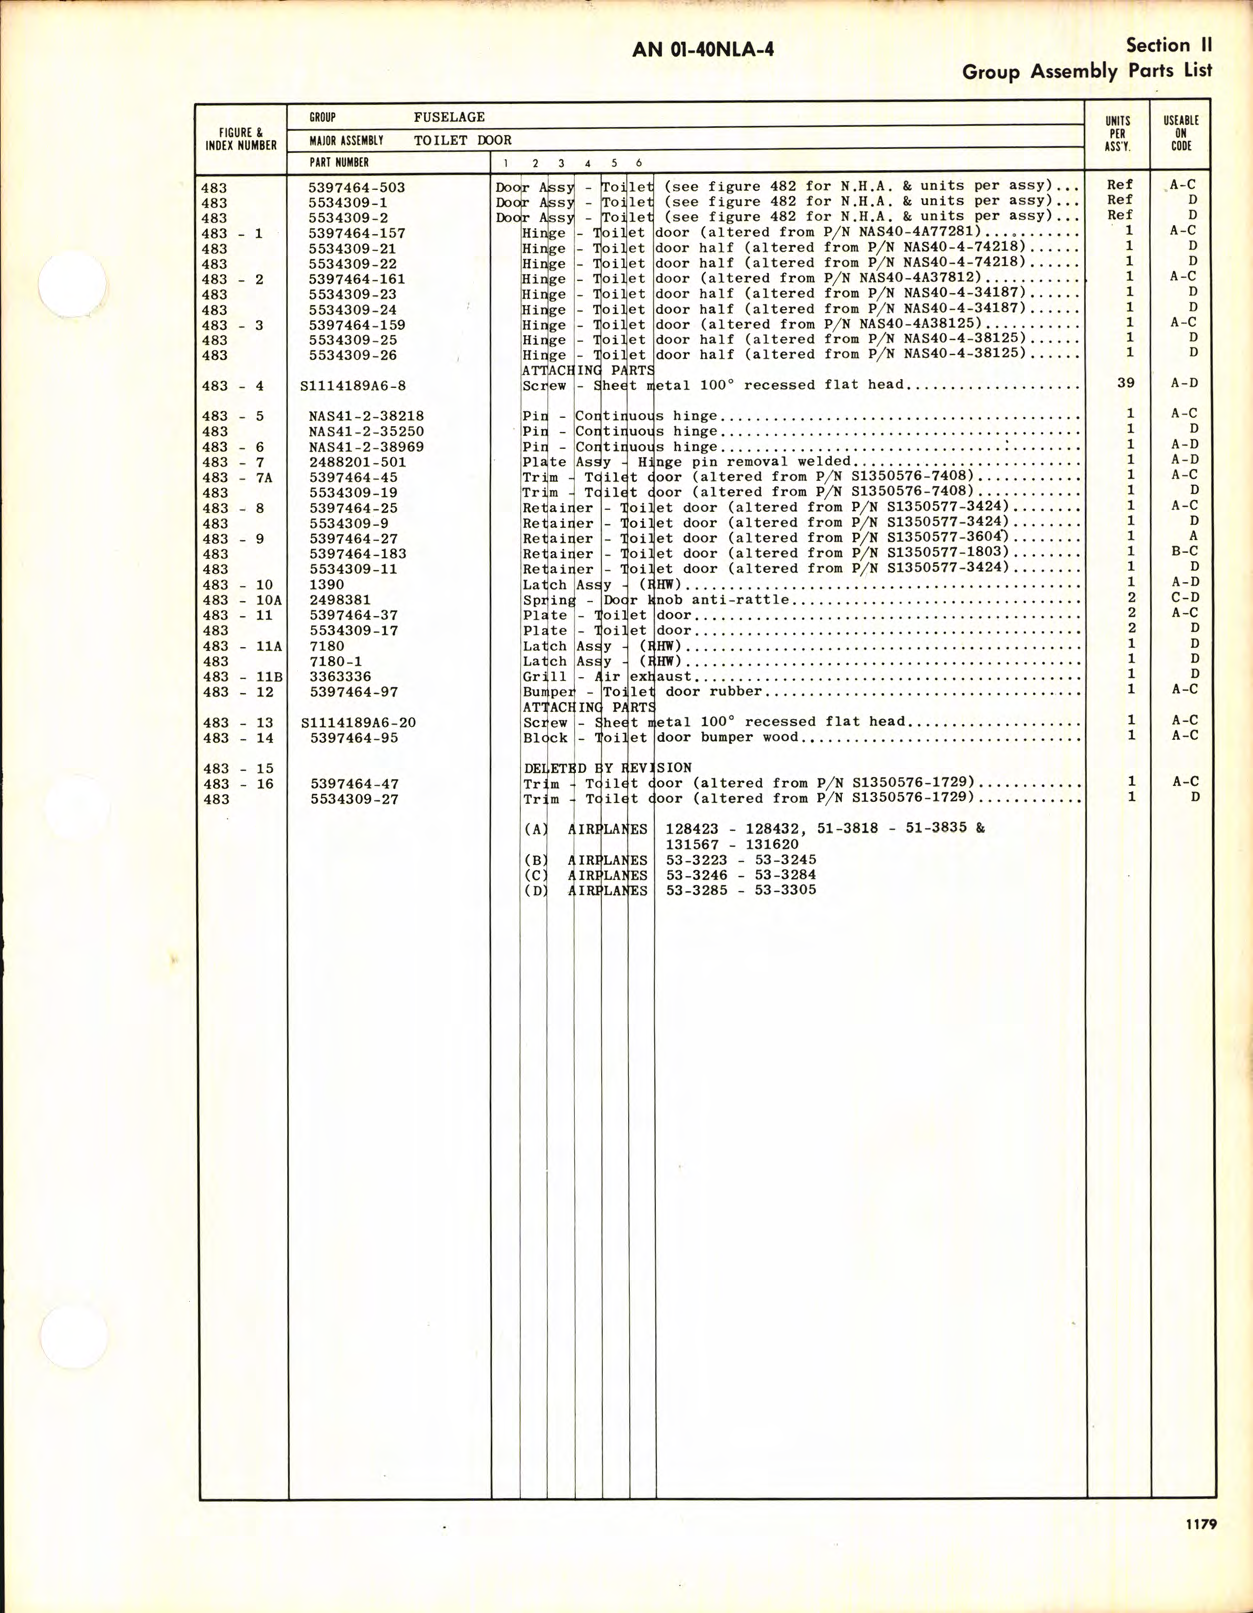 Sample page 5 from AirCorps Library document: Parts Catalog for DC-6 Series